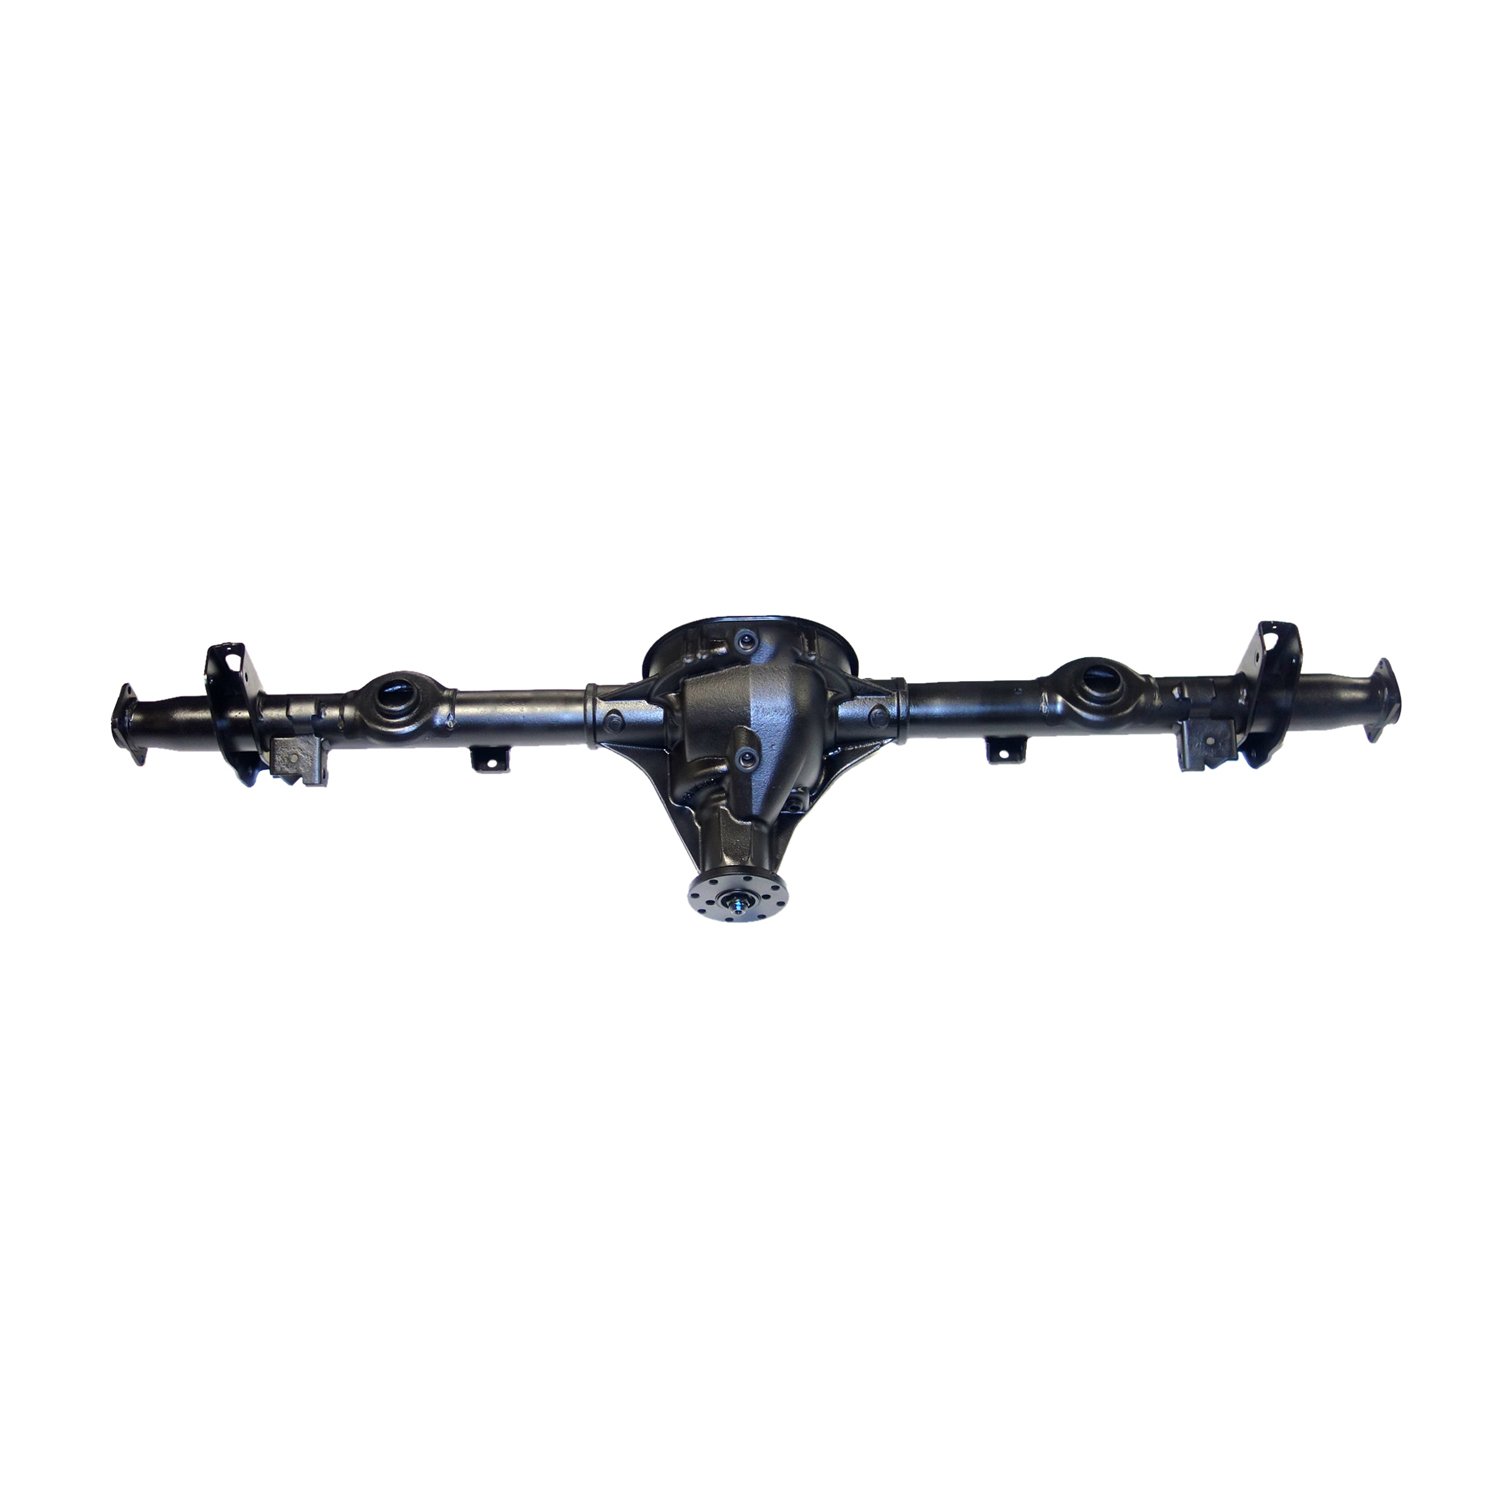 Remanufactured Complete Axle Assembly for 8.8" 2005 Crown Vic 3.55 , ABS, Posi LSD